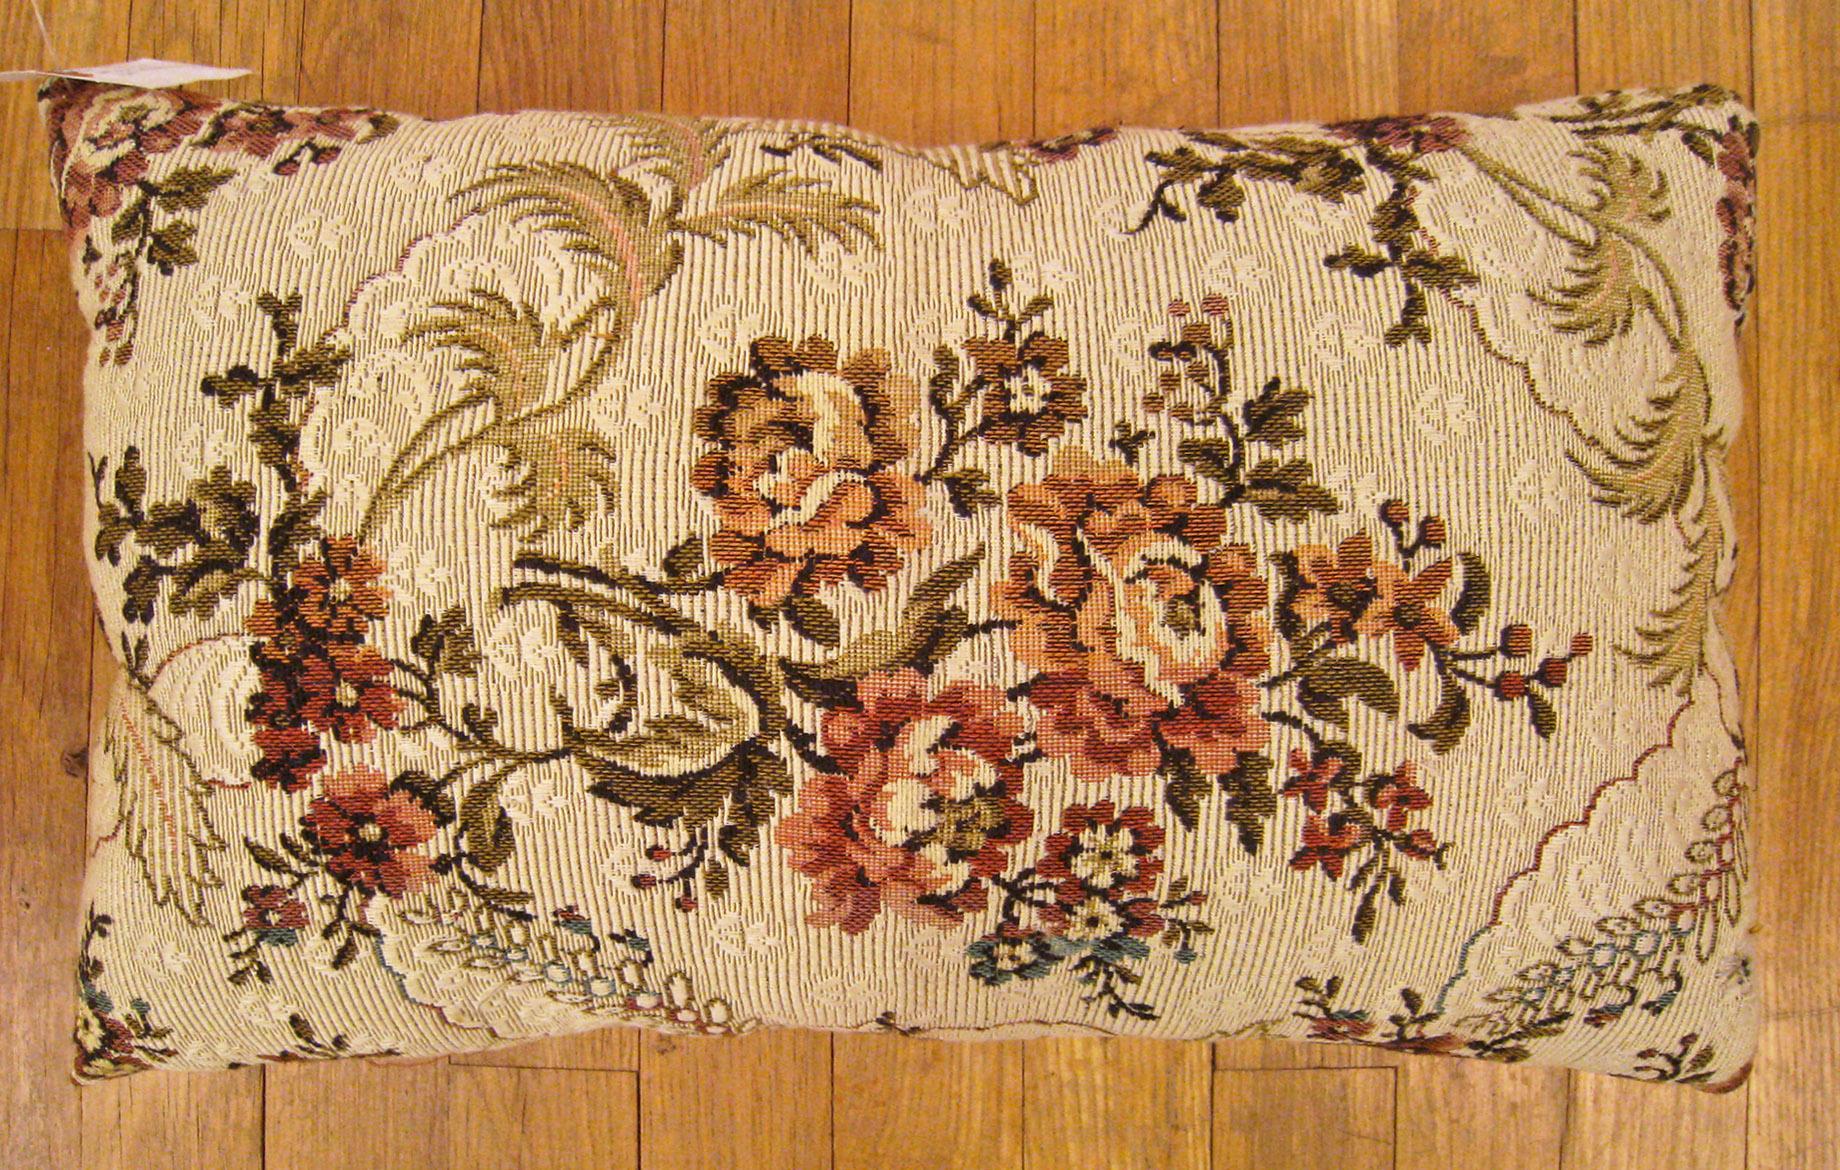 Antique Jacquard Tapestry pillow; size 1'0” x 1'8”.

An antique decorative pillow with floral elements allover an ivory central field, size 1'0